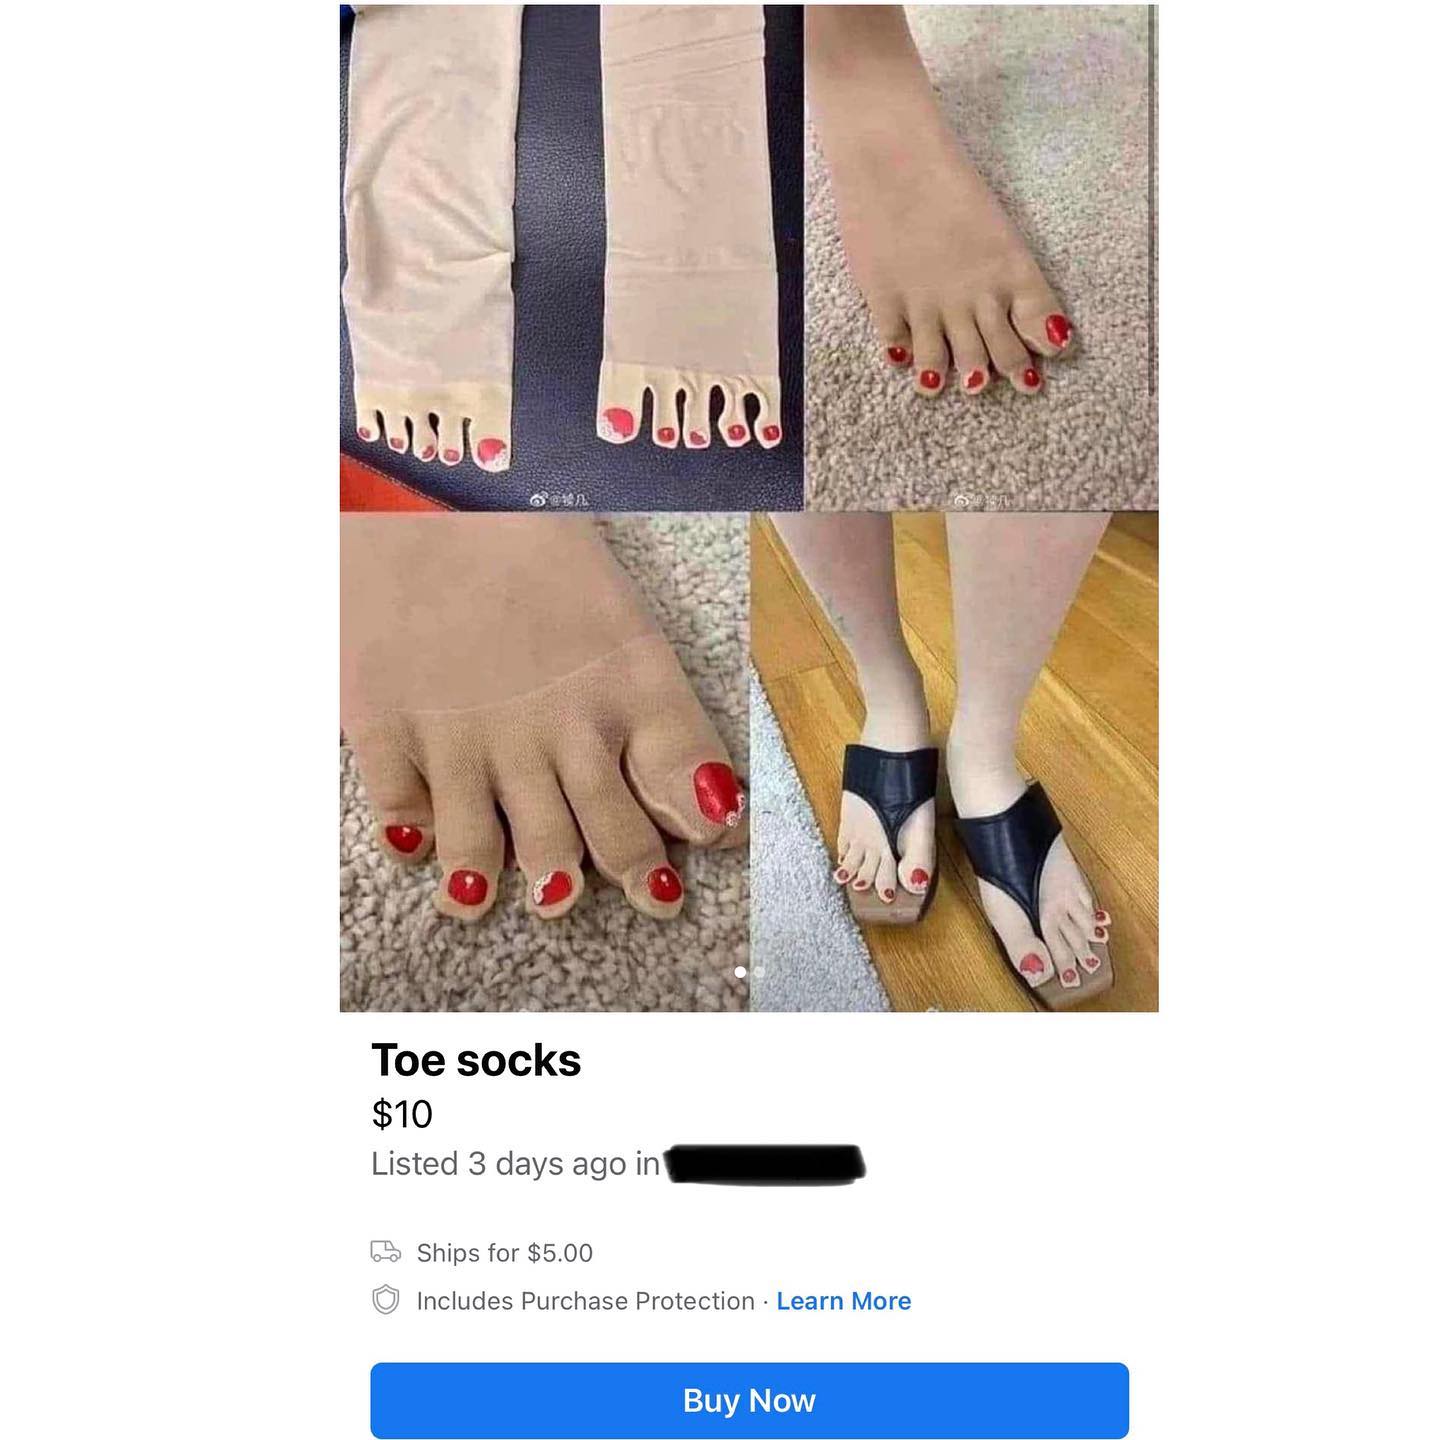 picture of socks designed to look like bare toes with painted nails